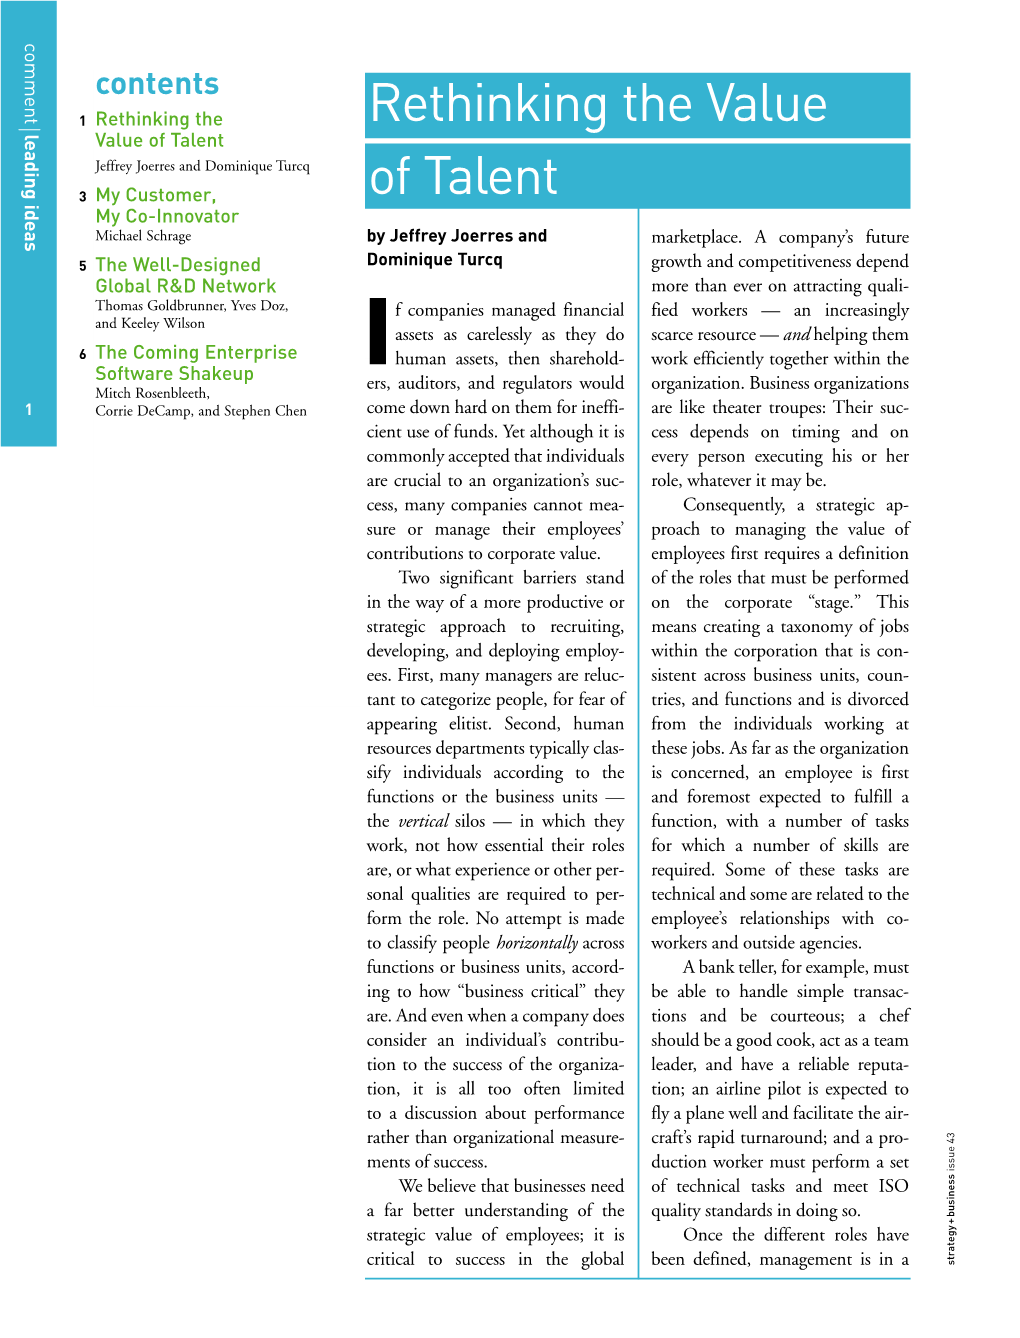 Rethinking the Value of Talent